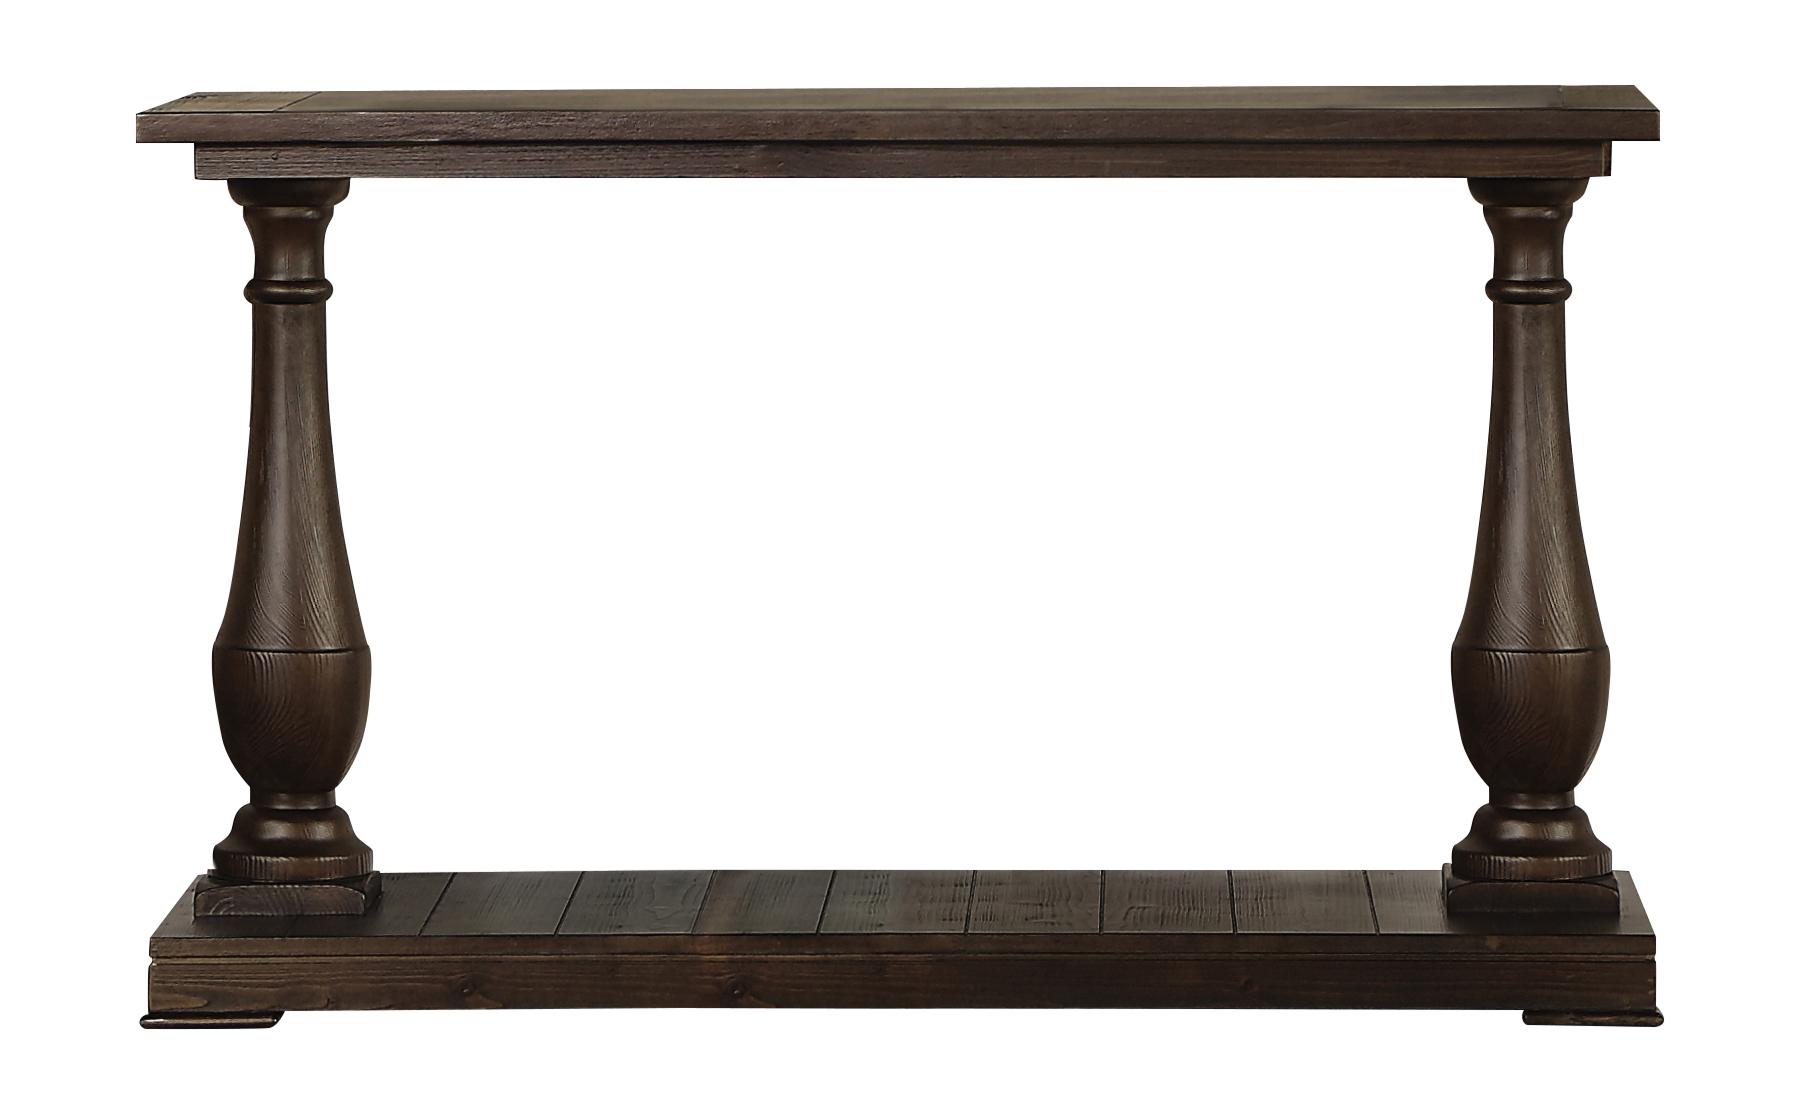 Transitional Sofa Table 753379 753379 in Coffee 